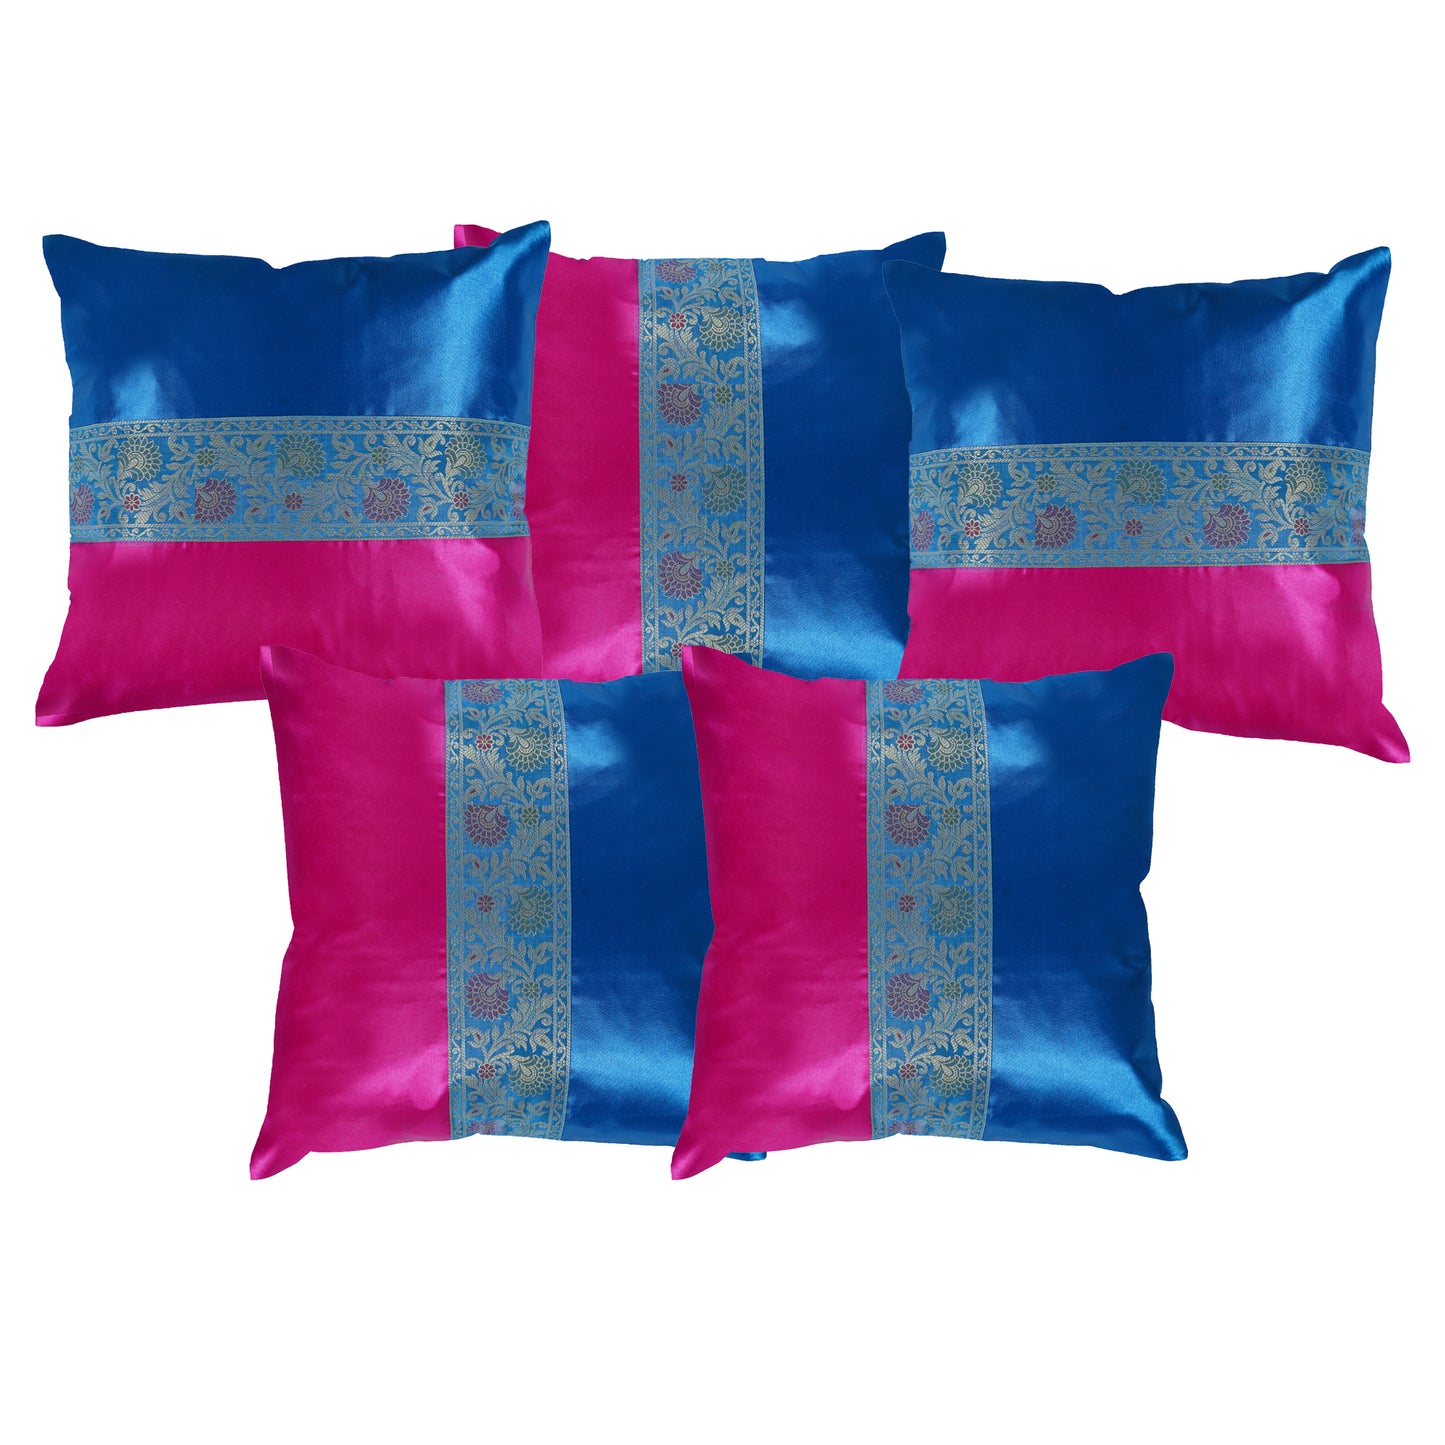 Set of 2 Pc Indian Solid Soft Silky Satin Blue & Magenta Pink Cushion Covers Square Throw Decorative Pillowcases for Couch Sofa Home Décor 16X16 In